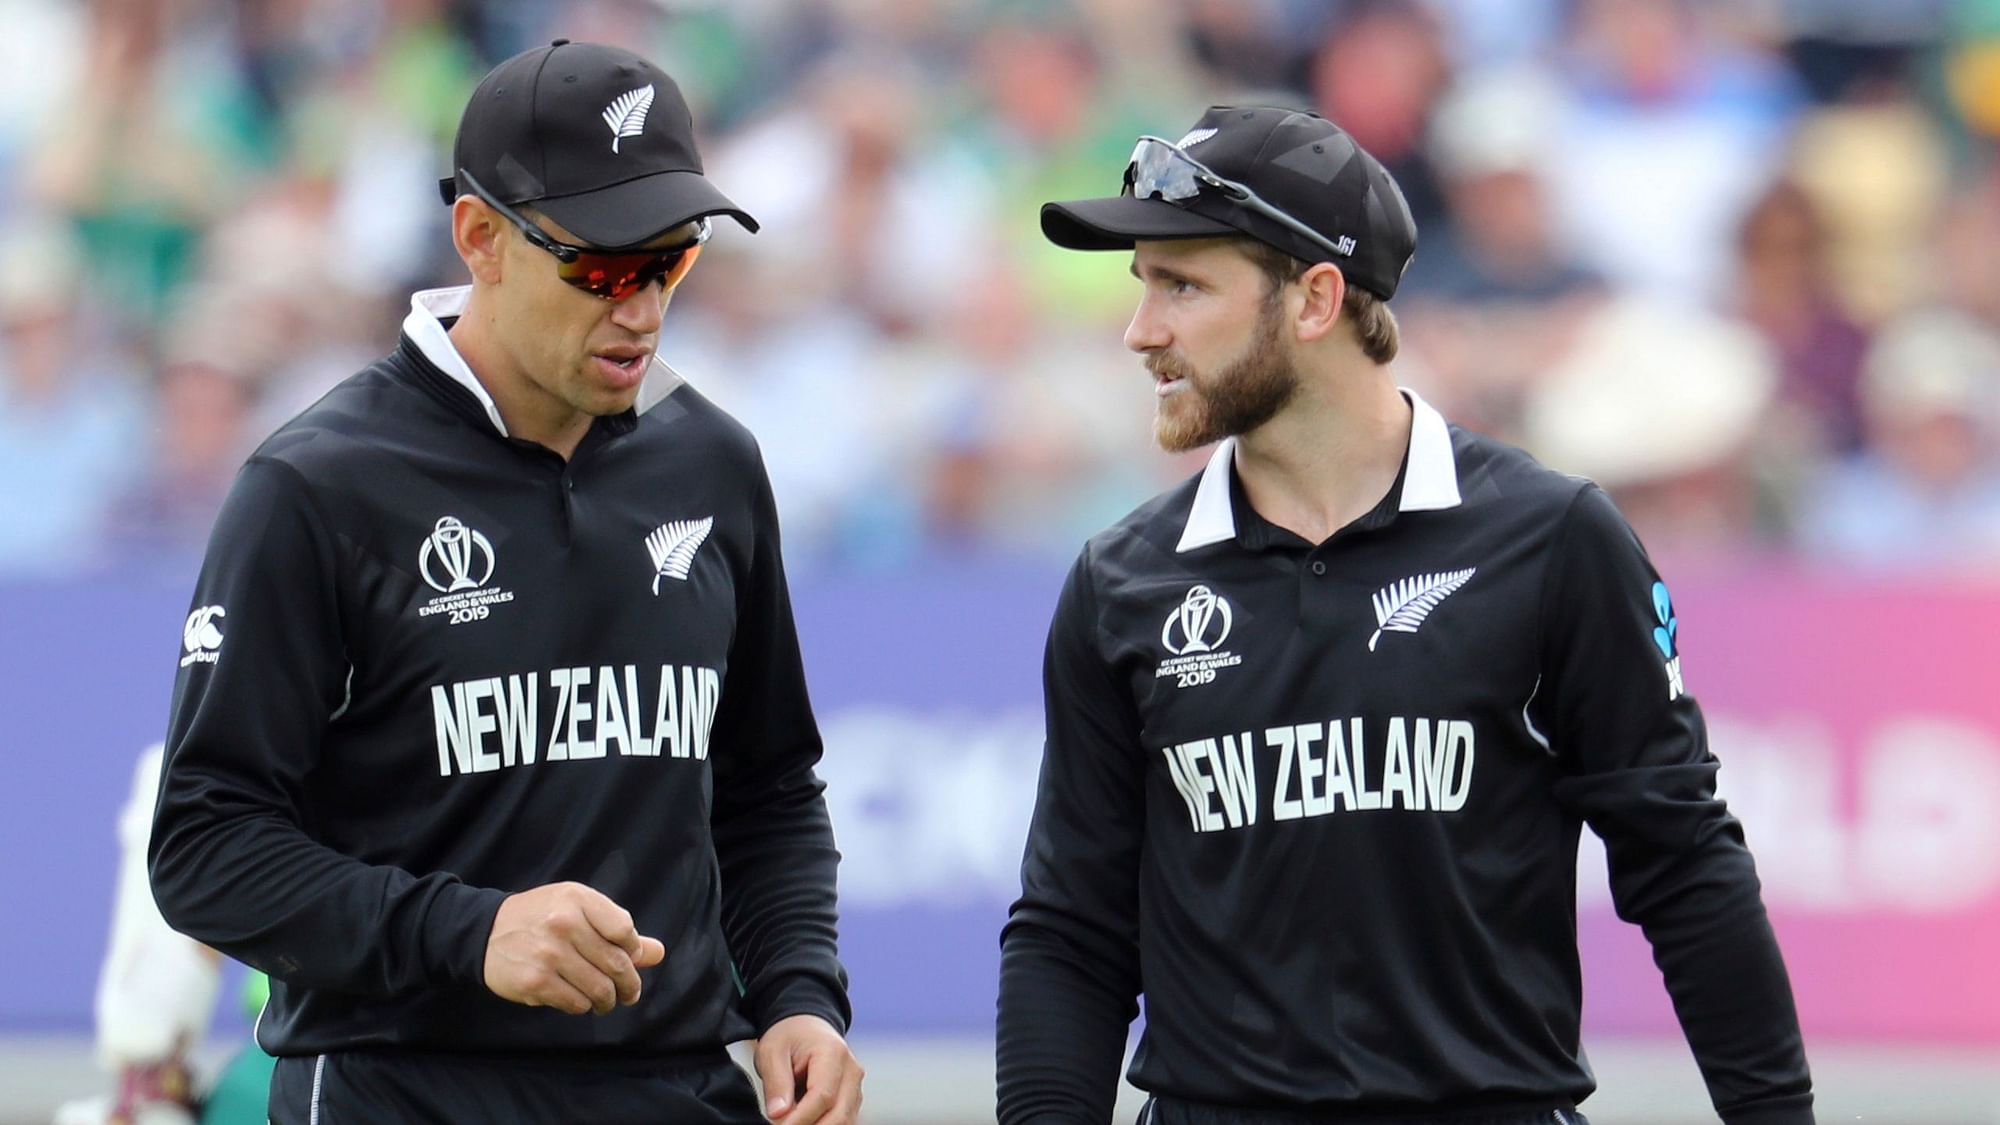 Both New Zealand and Pakistan are fielding an unchanged side.